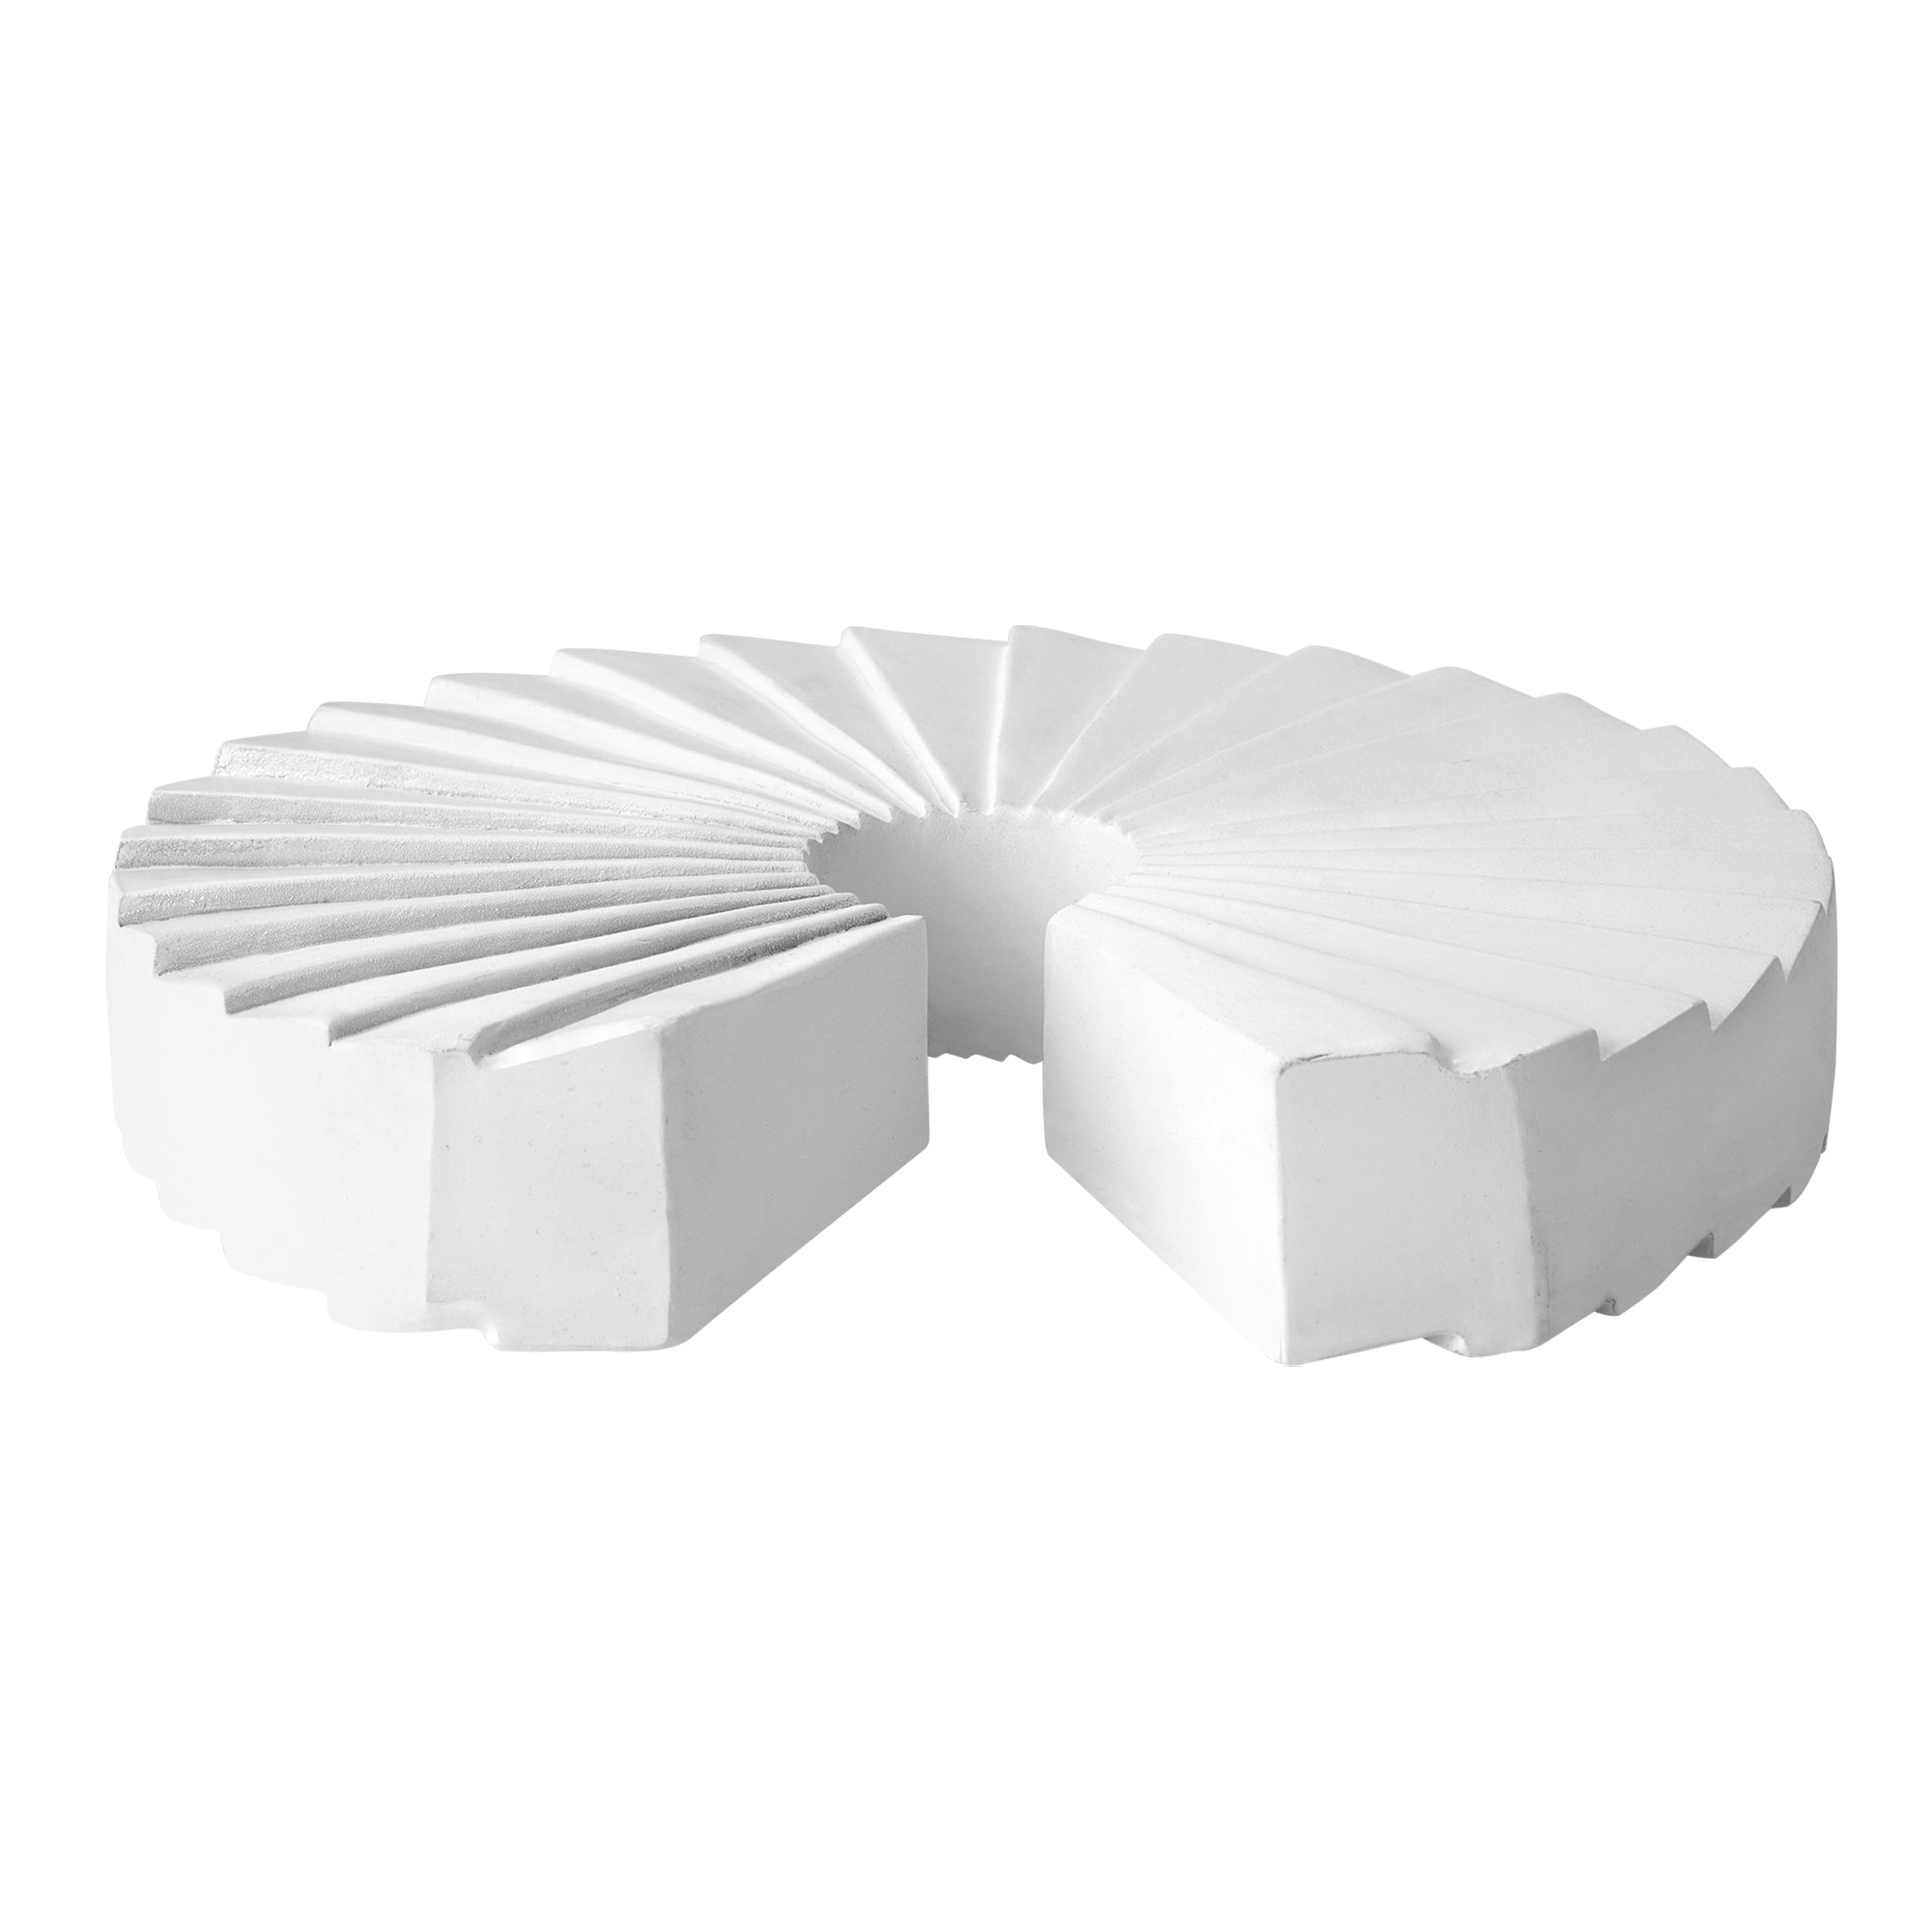 Cascading Curls 2-Piece Resin Table Top Set in White